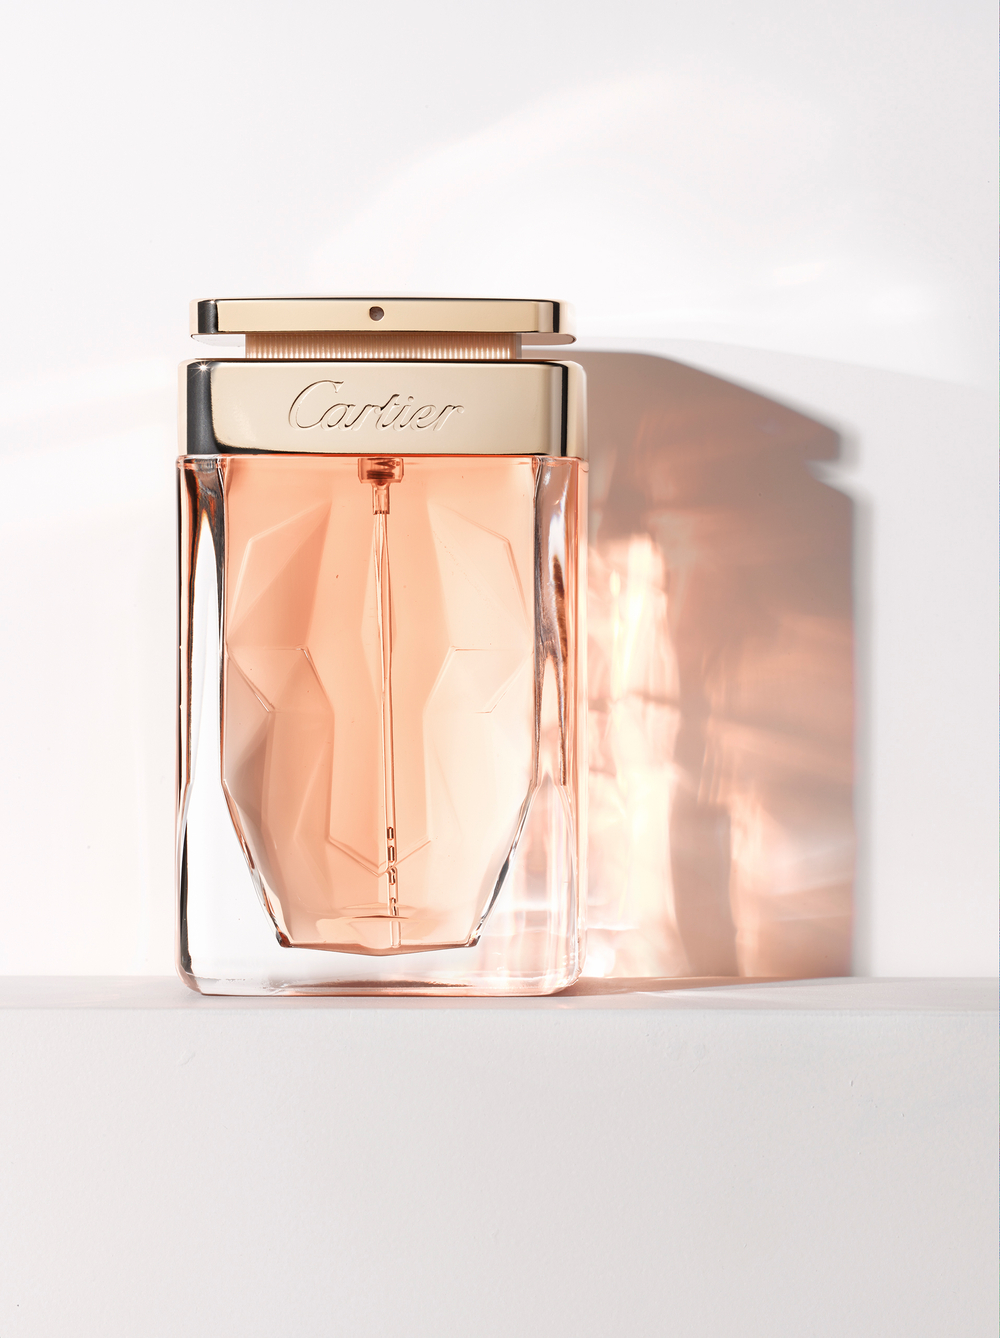 Cartier Fragrance advertising image